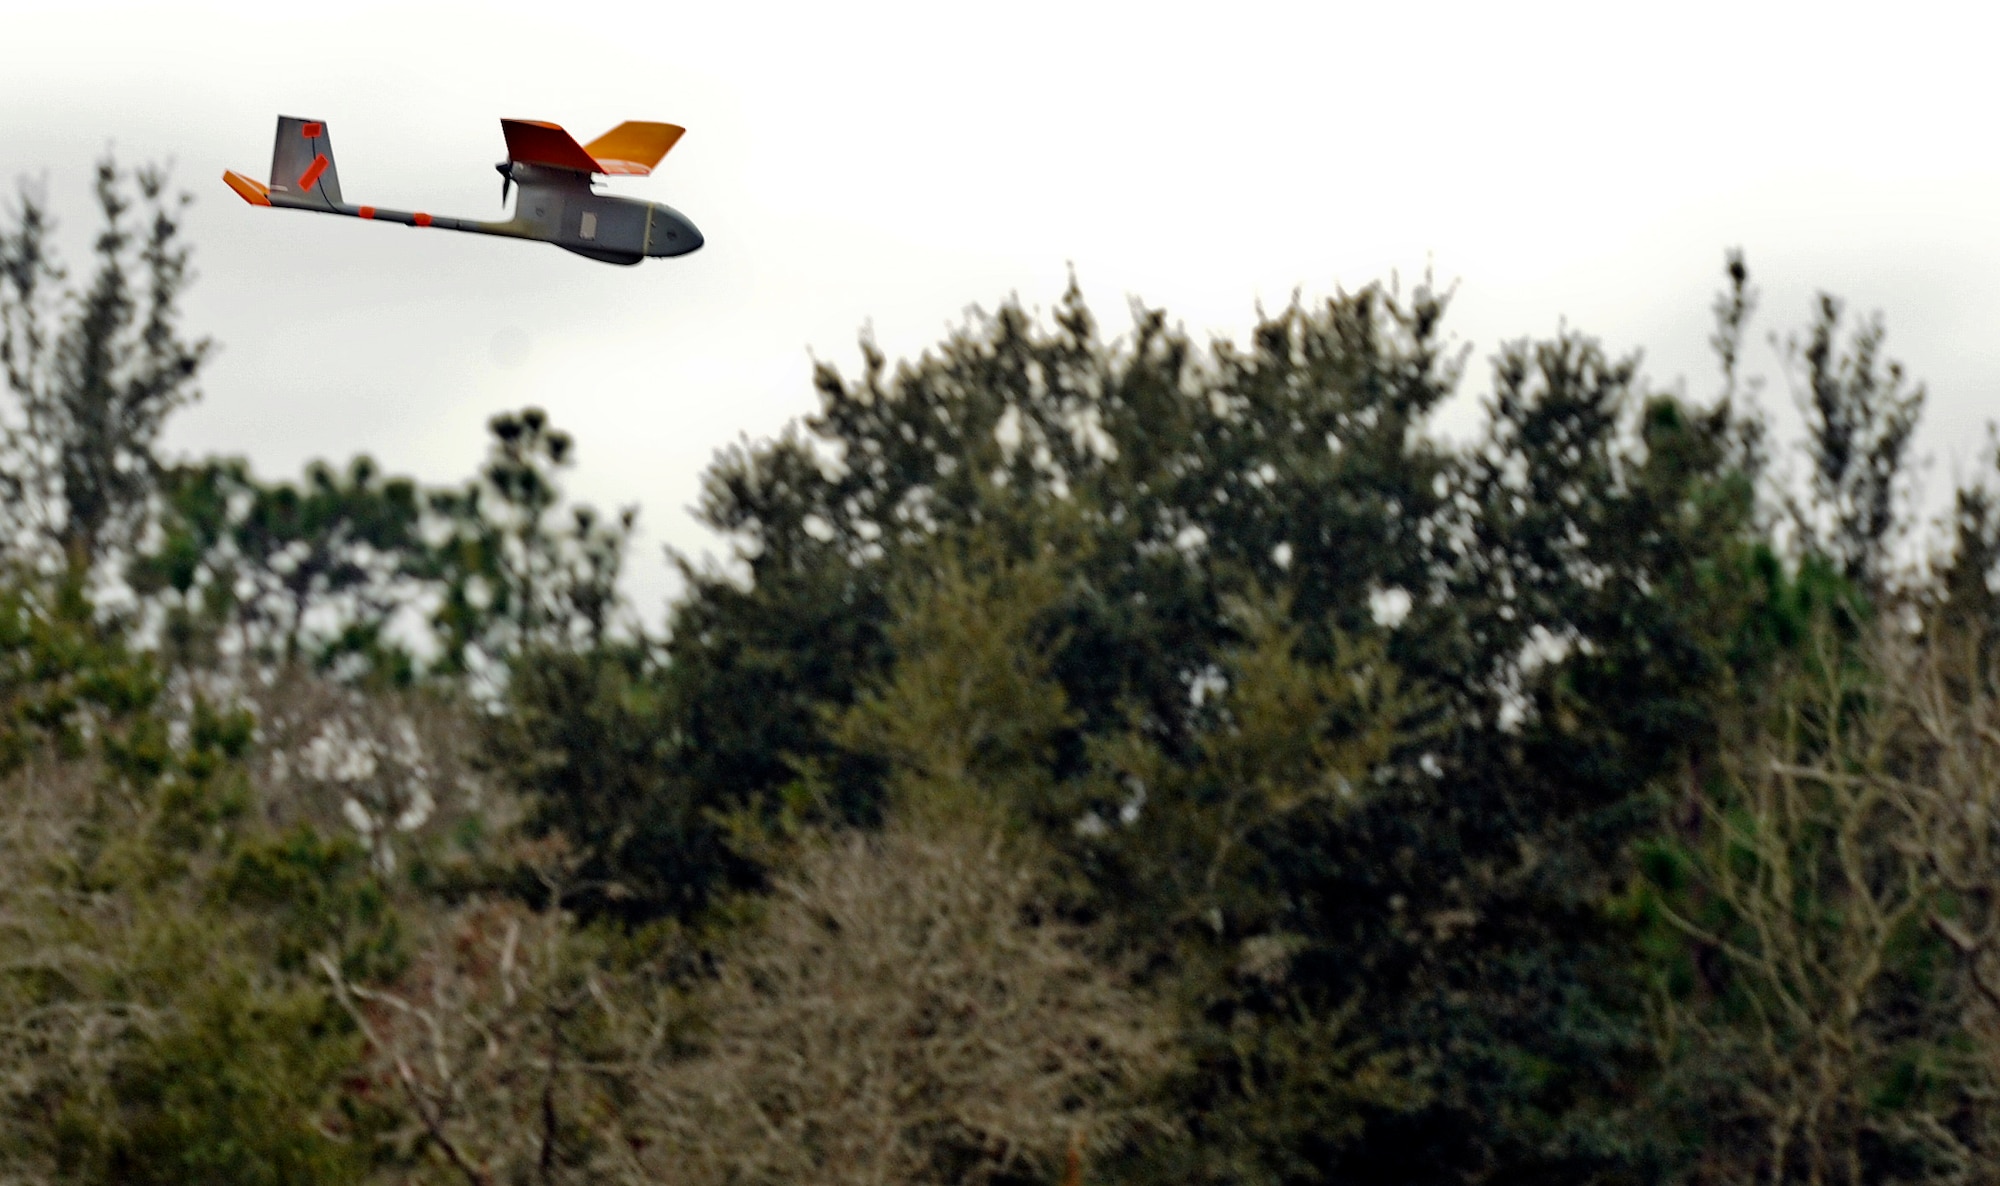 A RQ-11B Raven flies during training at Choctaw Field, Fla., March 4, 2014. This small unmanned aerial system does not require a runway for takeoff. (U.S. Air Force photo/Senior Airman Michelle Patten)